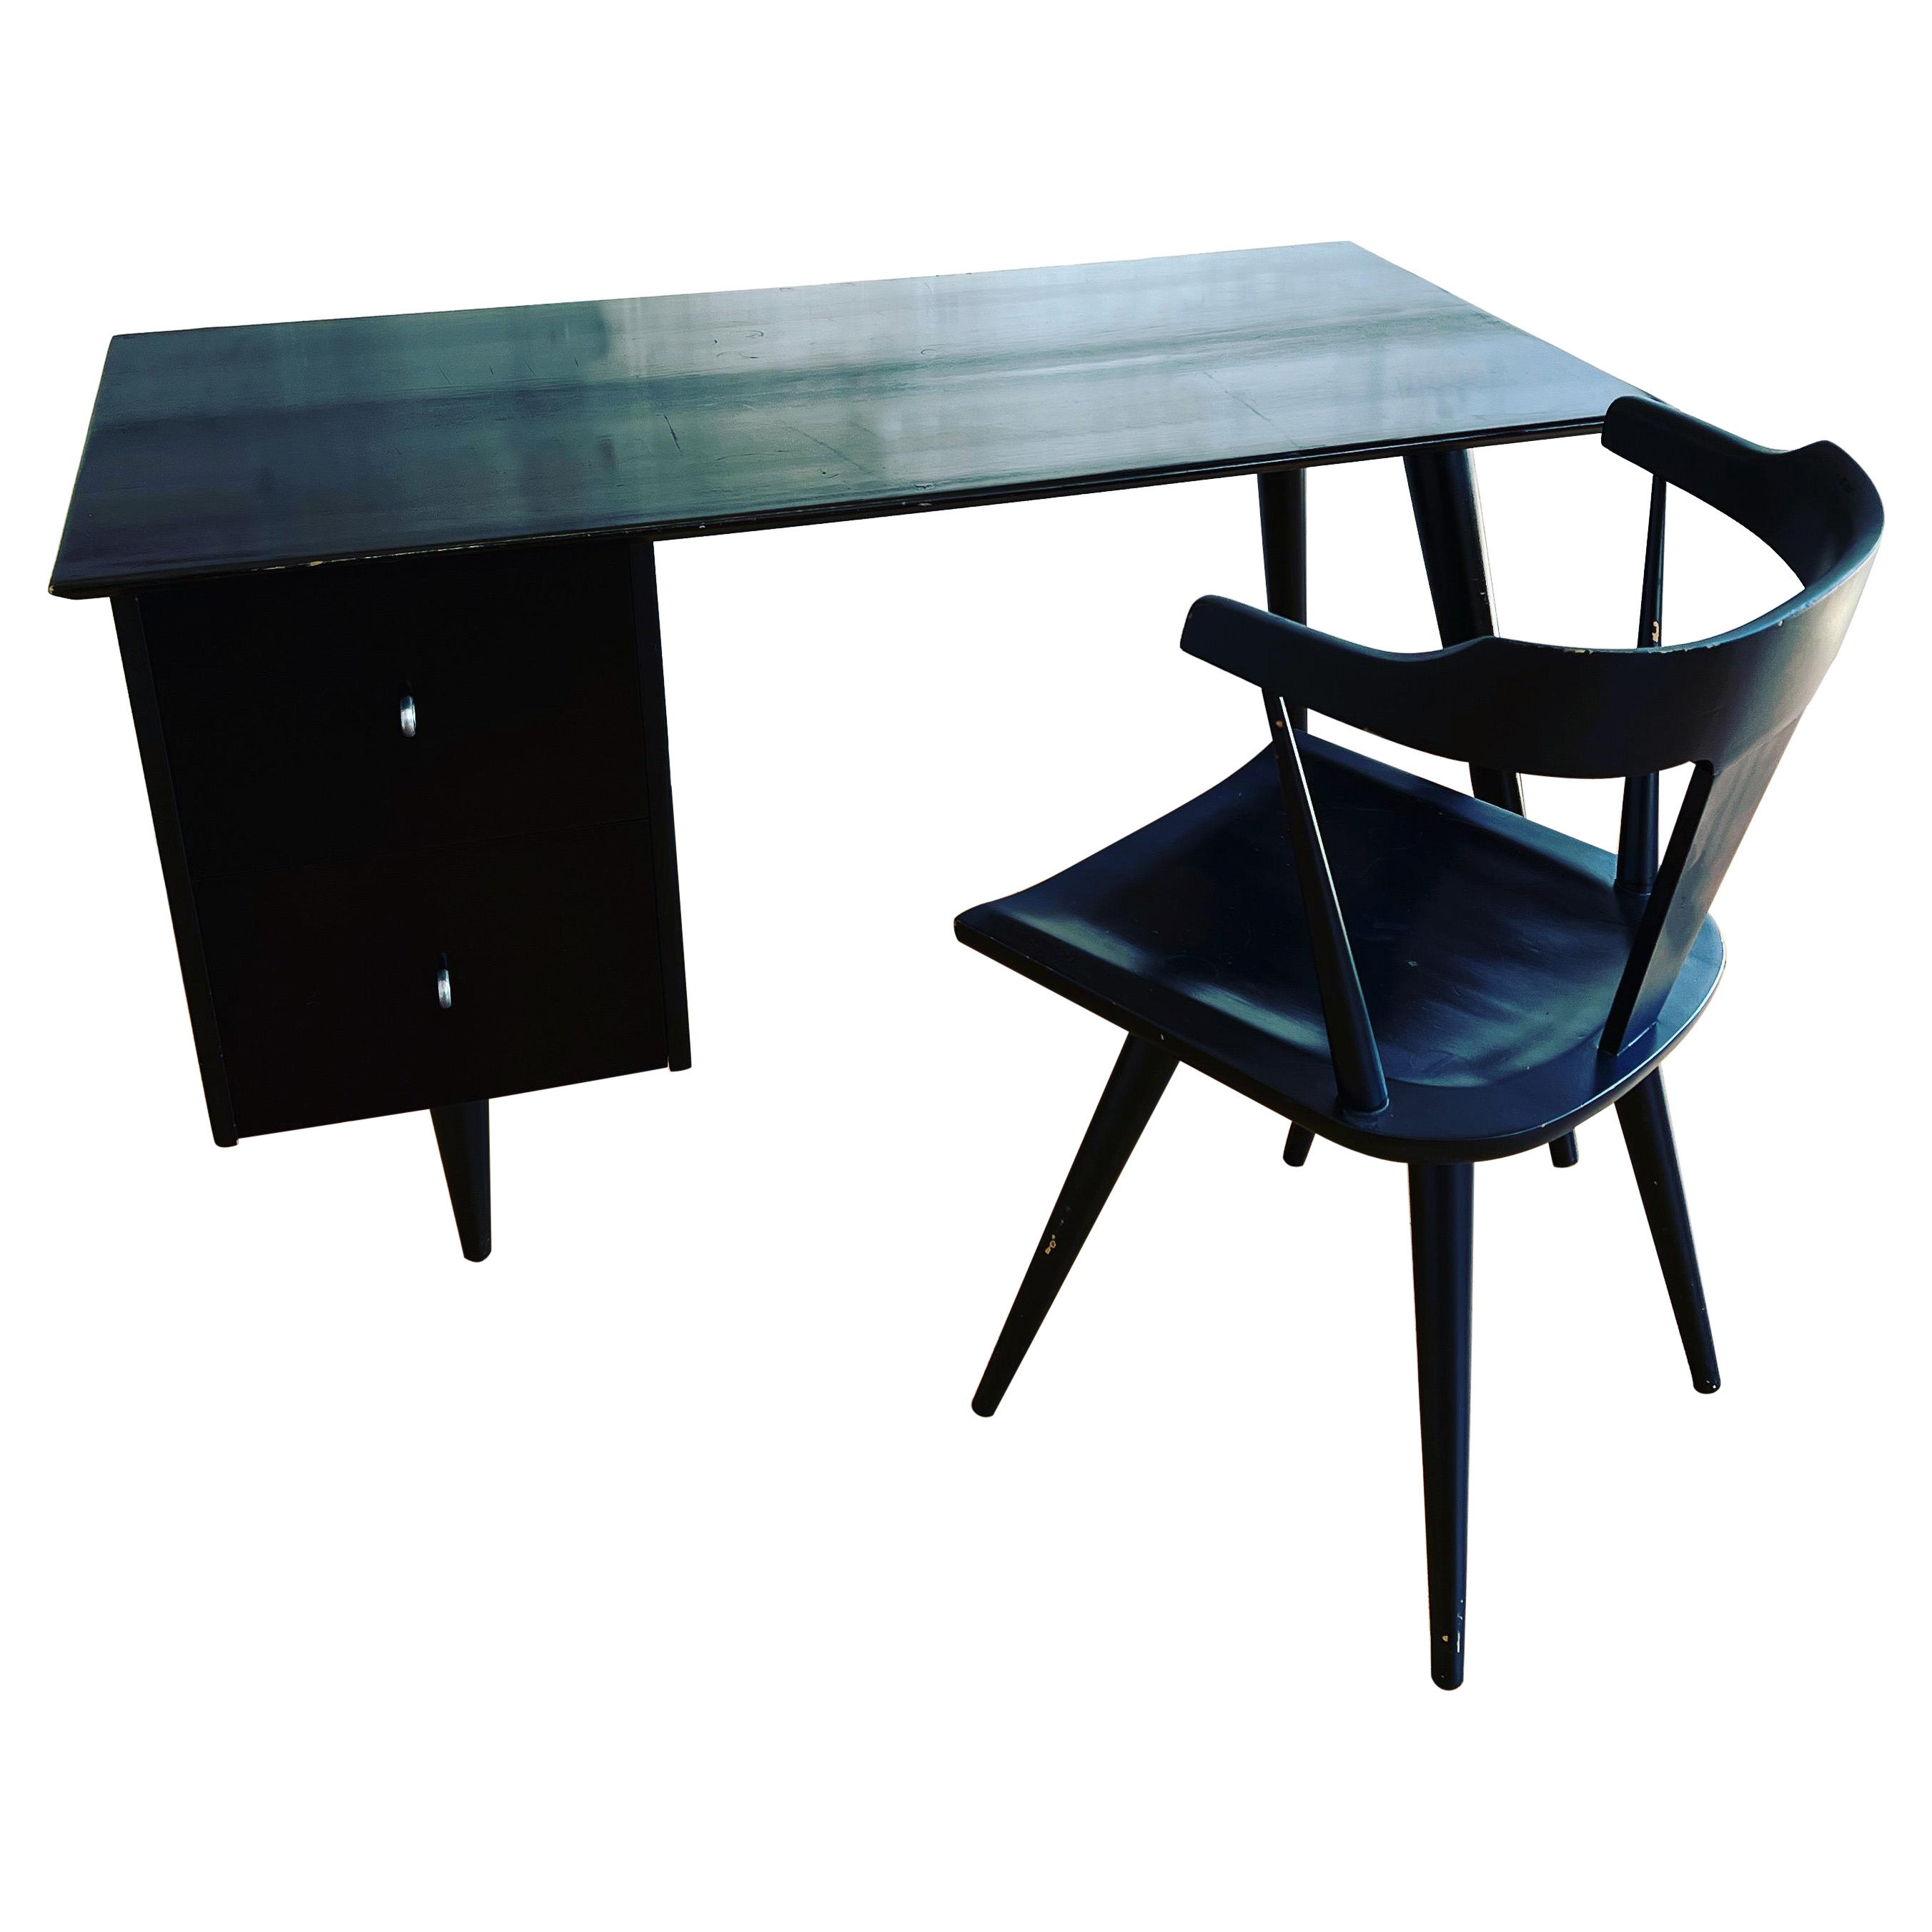 Paul McCobb Desk and Chair from the Planner Group by Winchendon